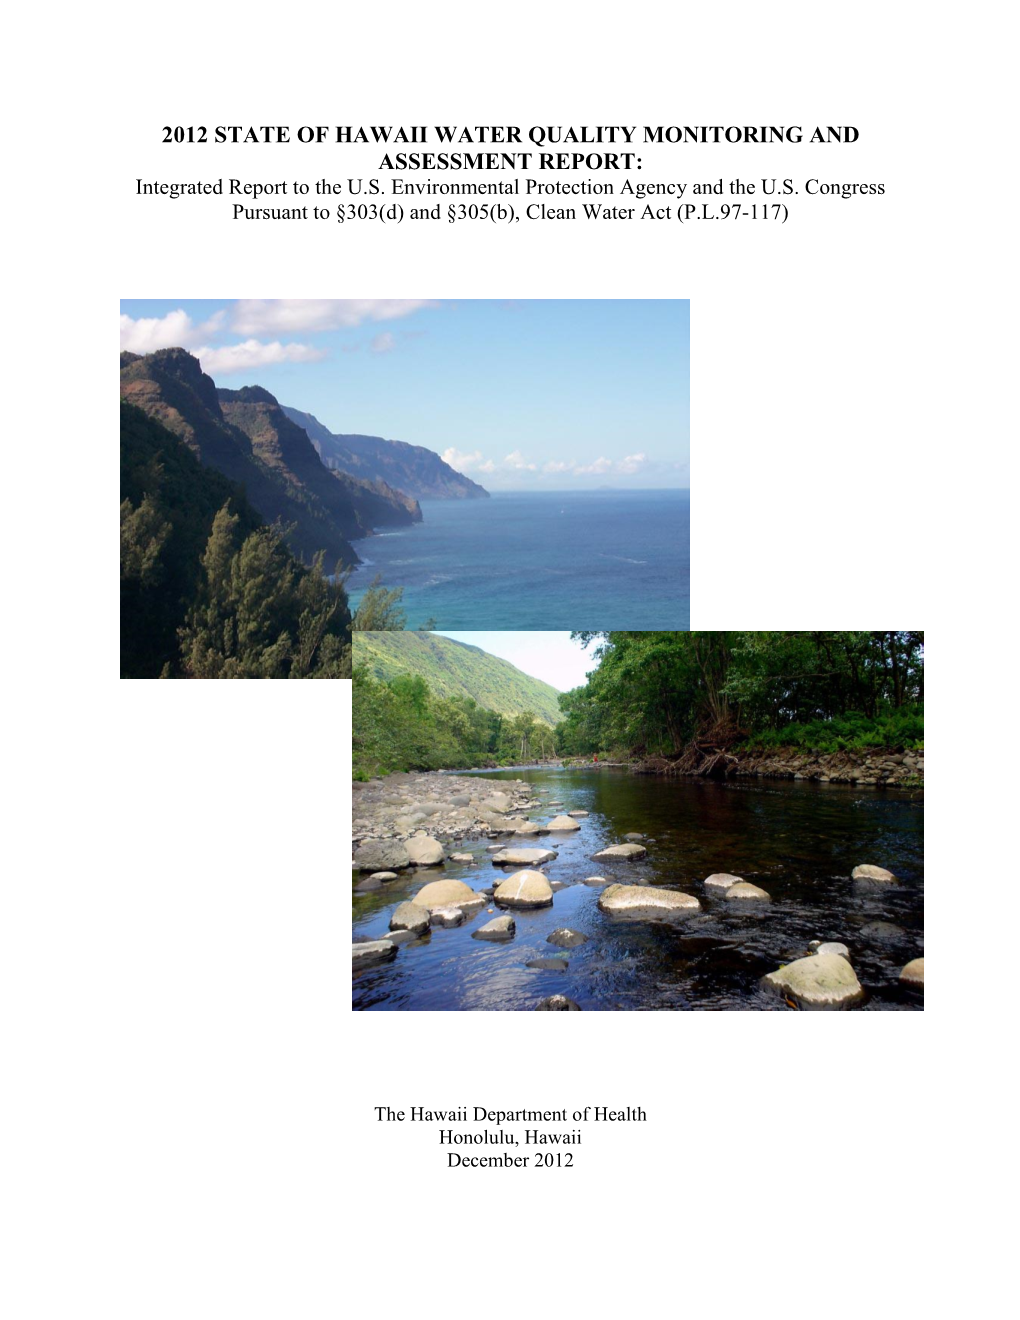 2012 STATE of HAWAII WATER QUALITY MONITORING and ASSESSMENT REPORT: Integrated Report to the U.S